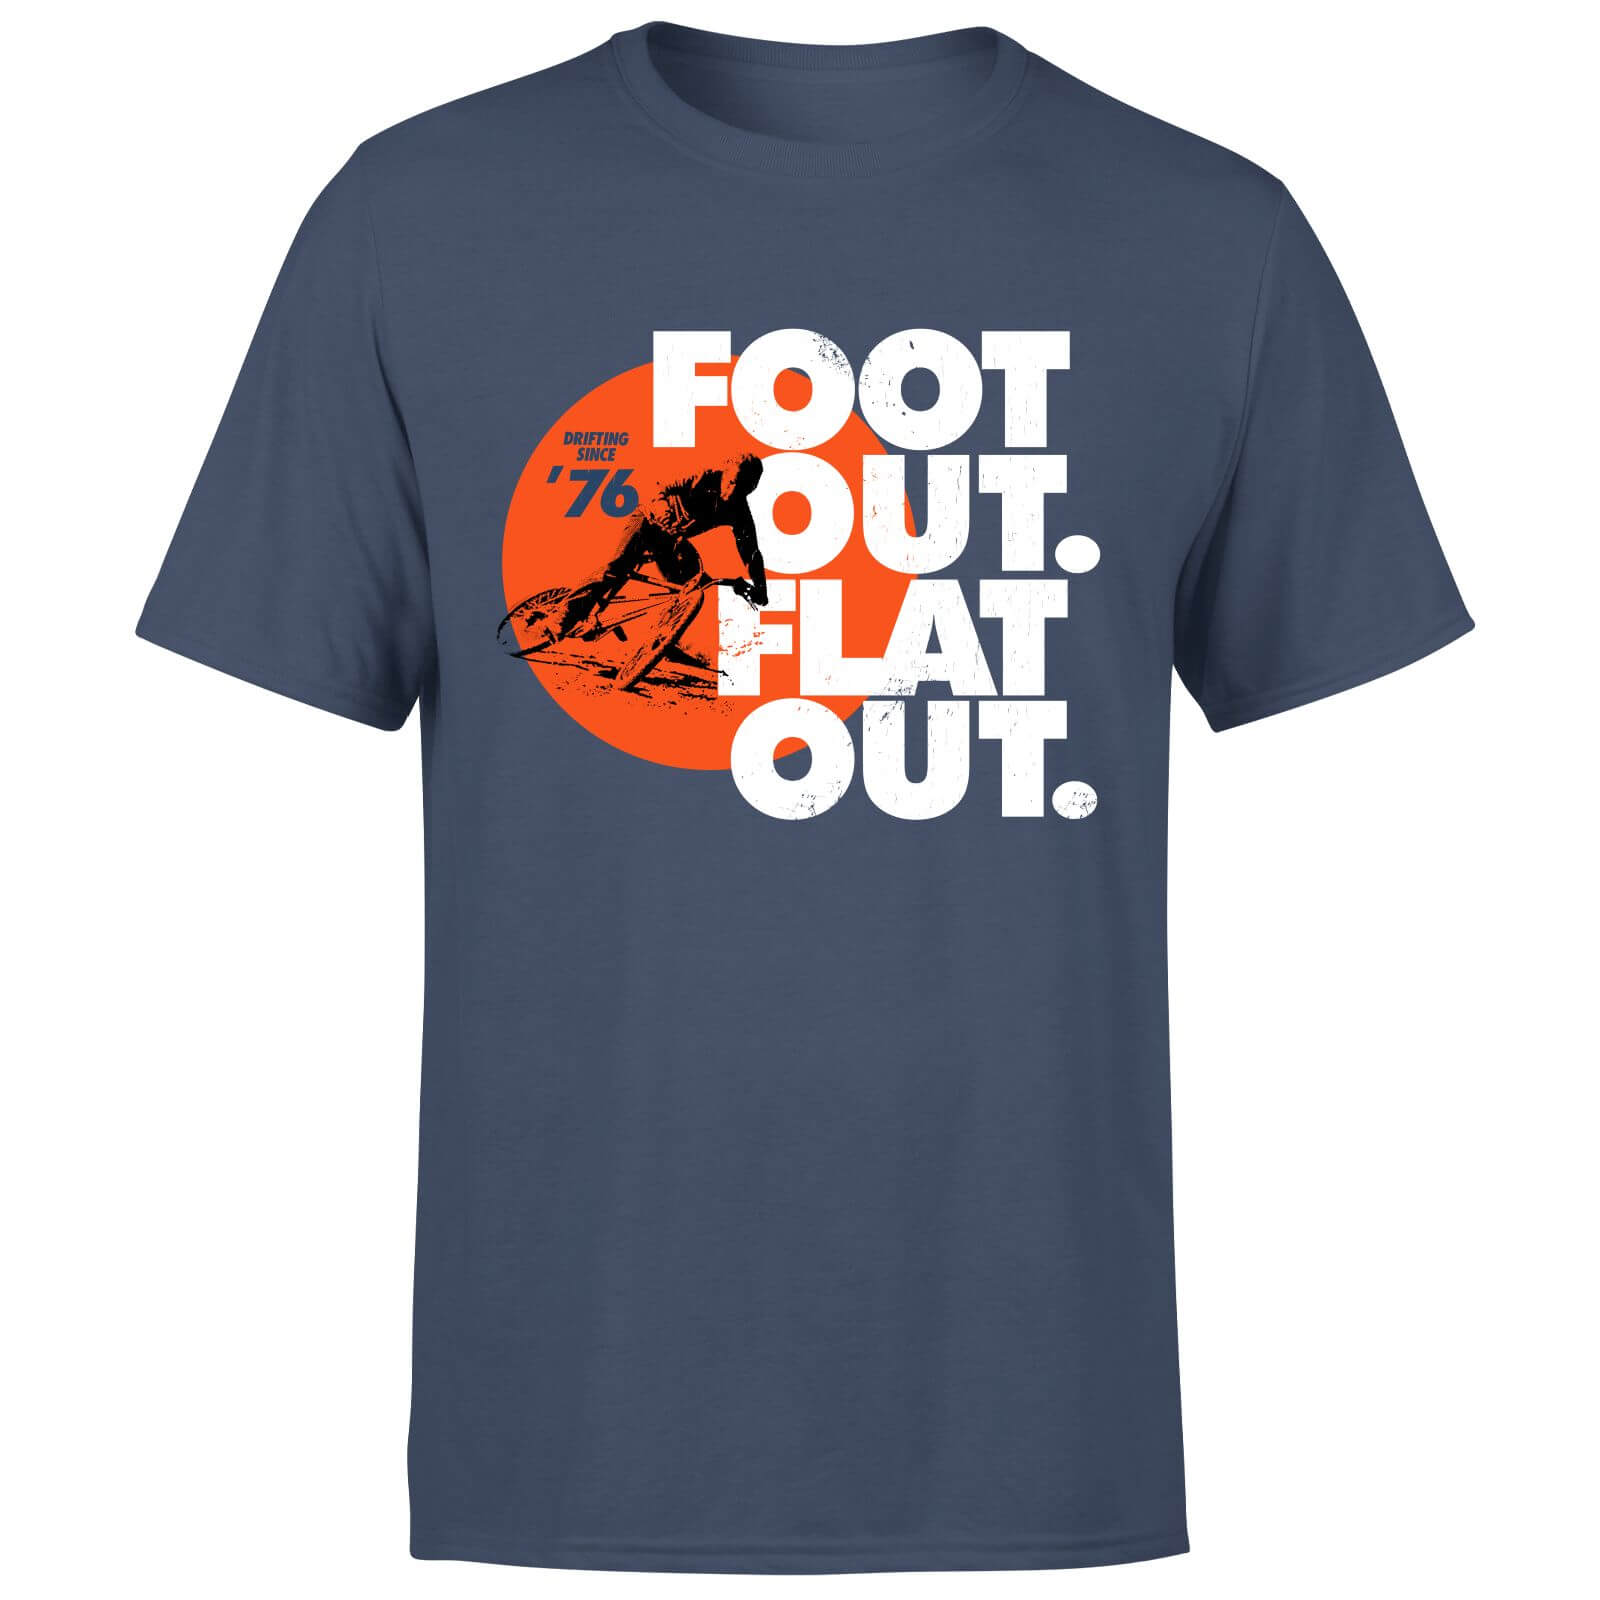 Foot Out. Flat Out. Men's T-Shirt - Navy - XS - Navy